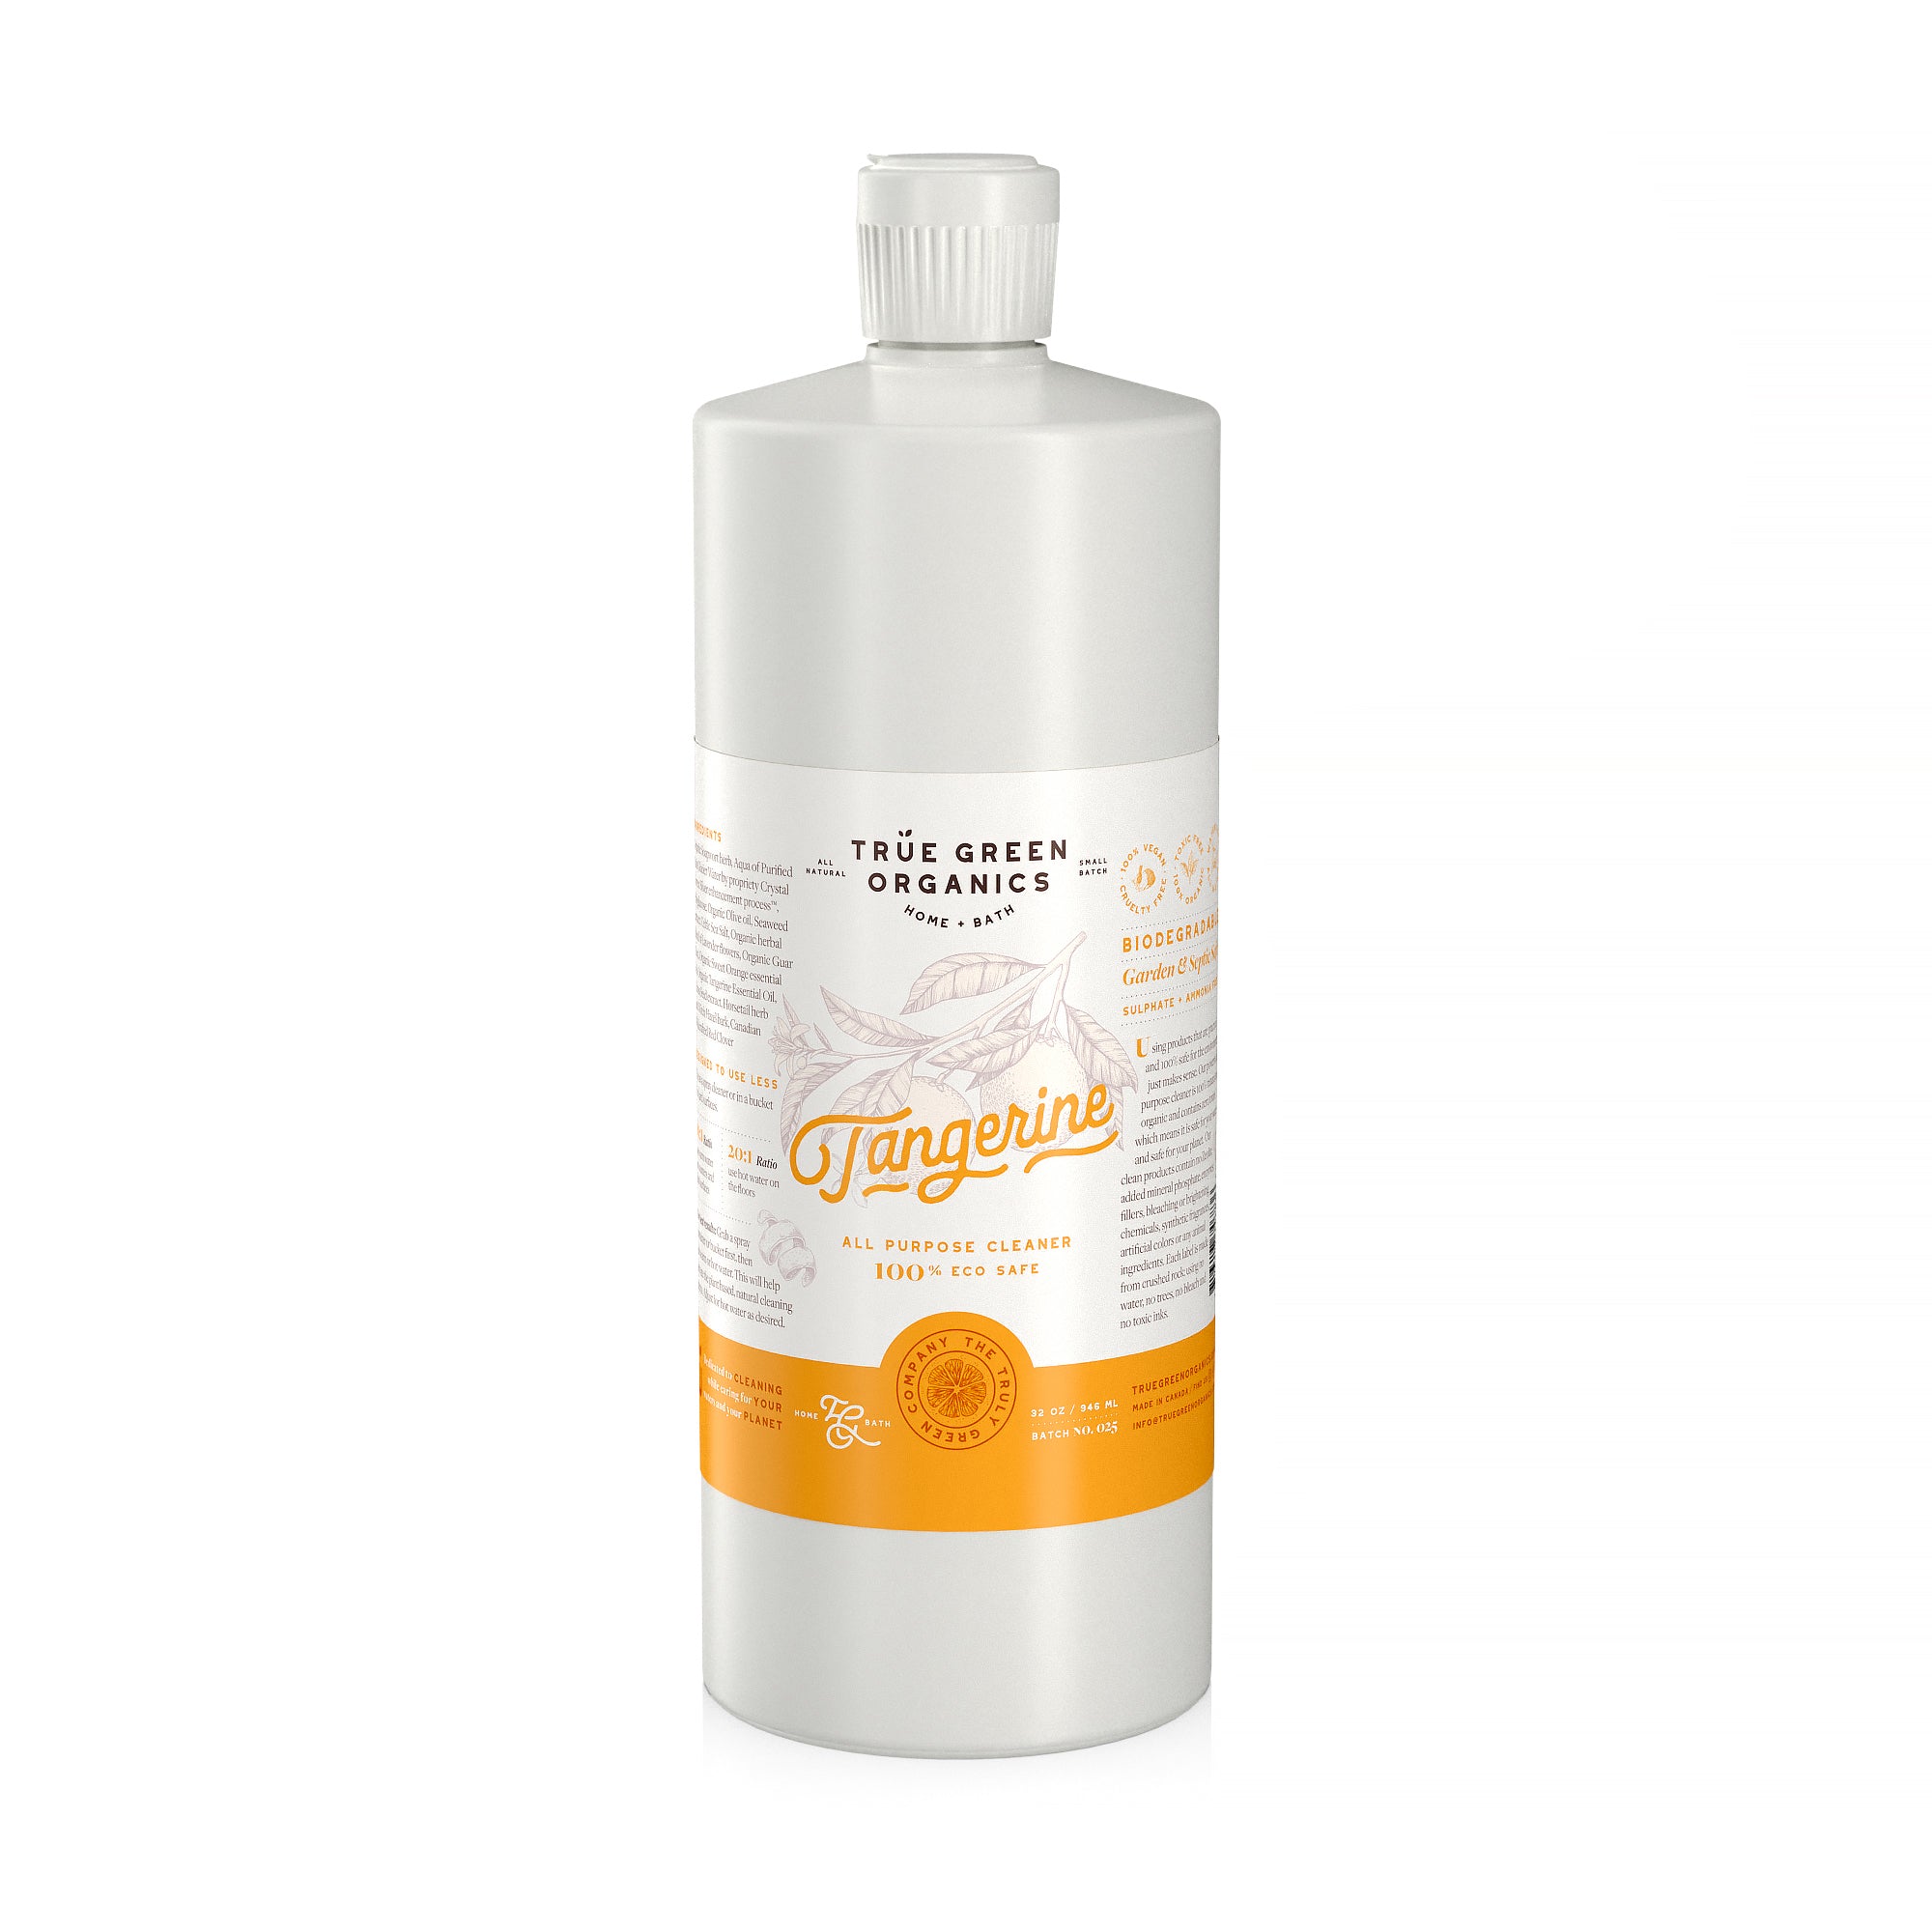 Tangerine Clean 100% Organic All Purpose Cleaner 4 Month Supply (32oz)